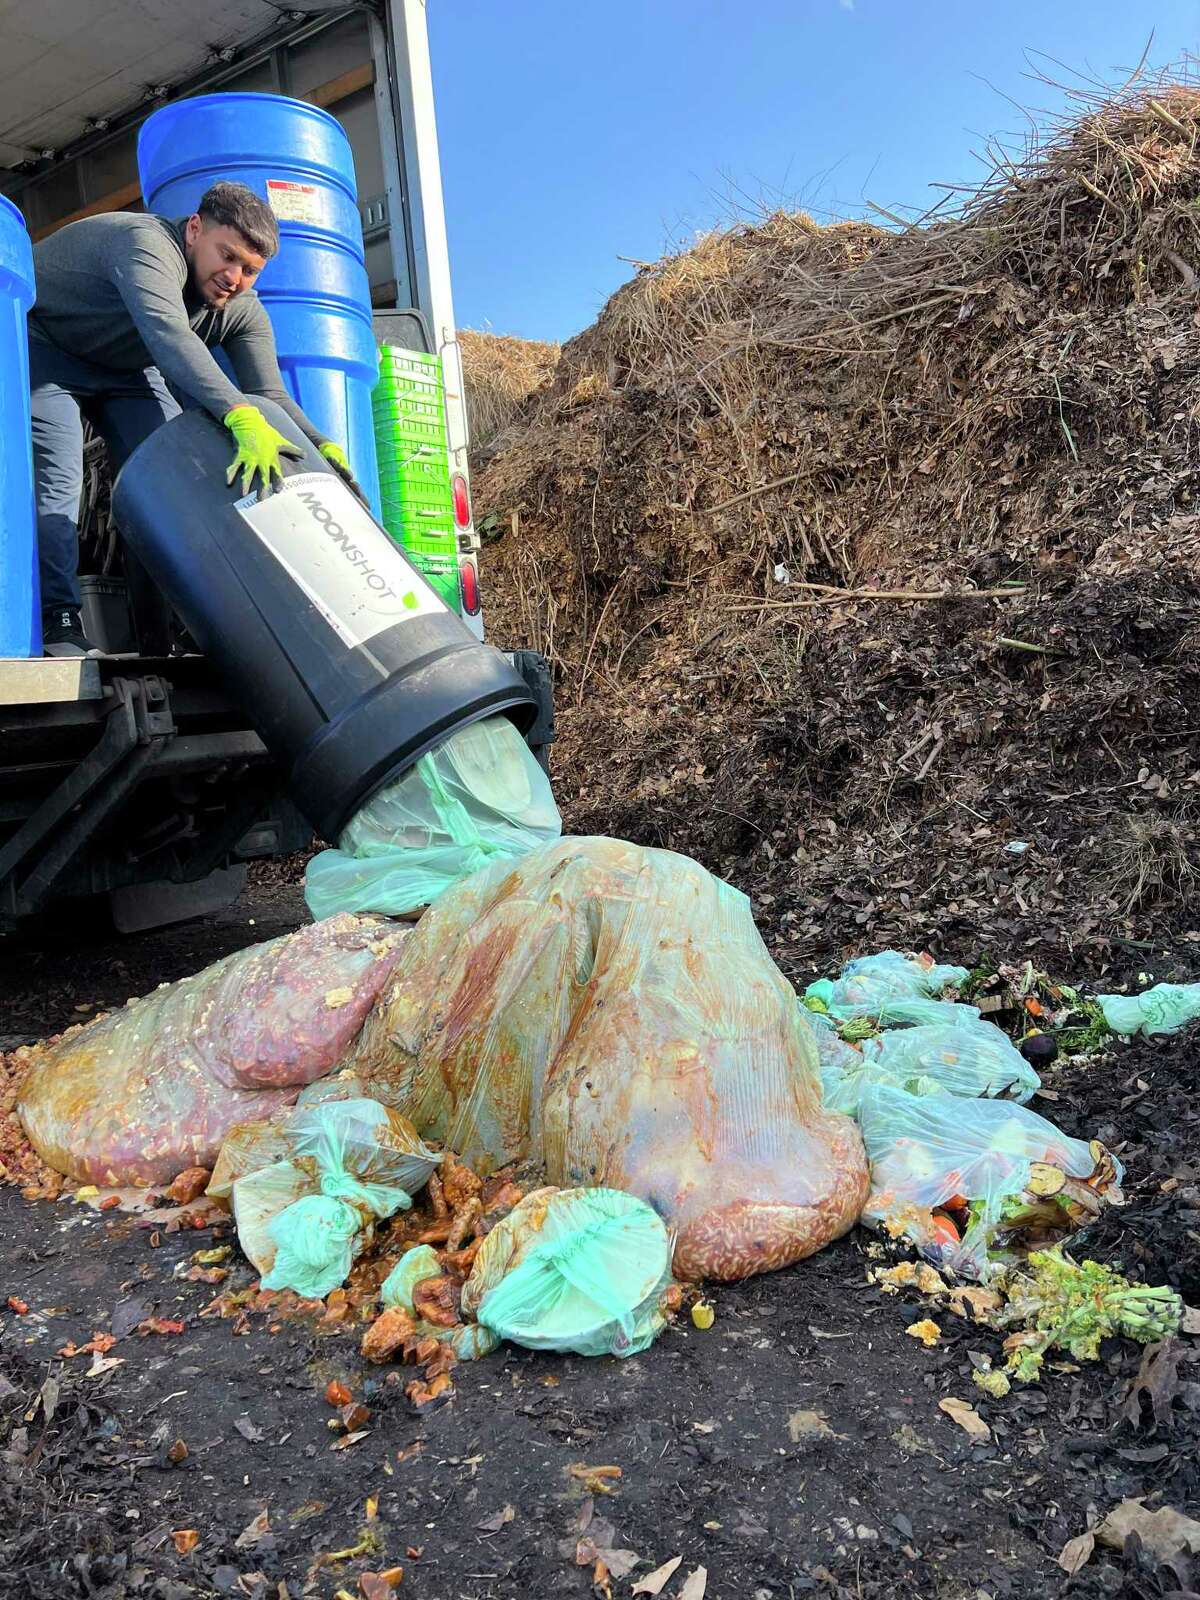 Moonshot Compost specializes in compost services and waste diversion. The company recently opened up a new location in the Houston Heights area at 1410 Bigelow St.